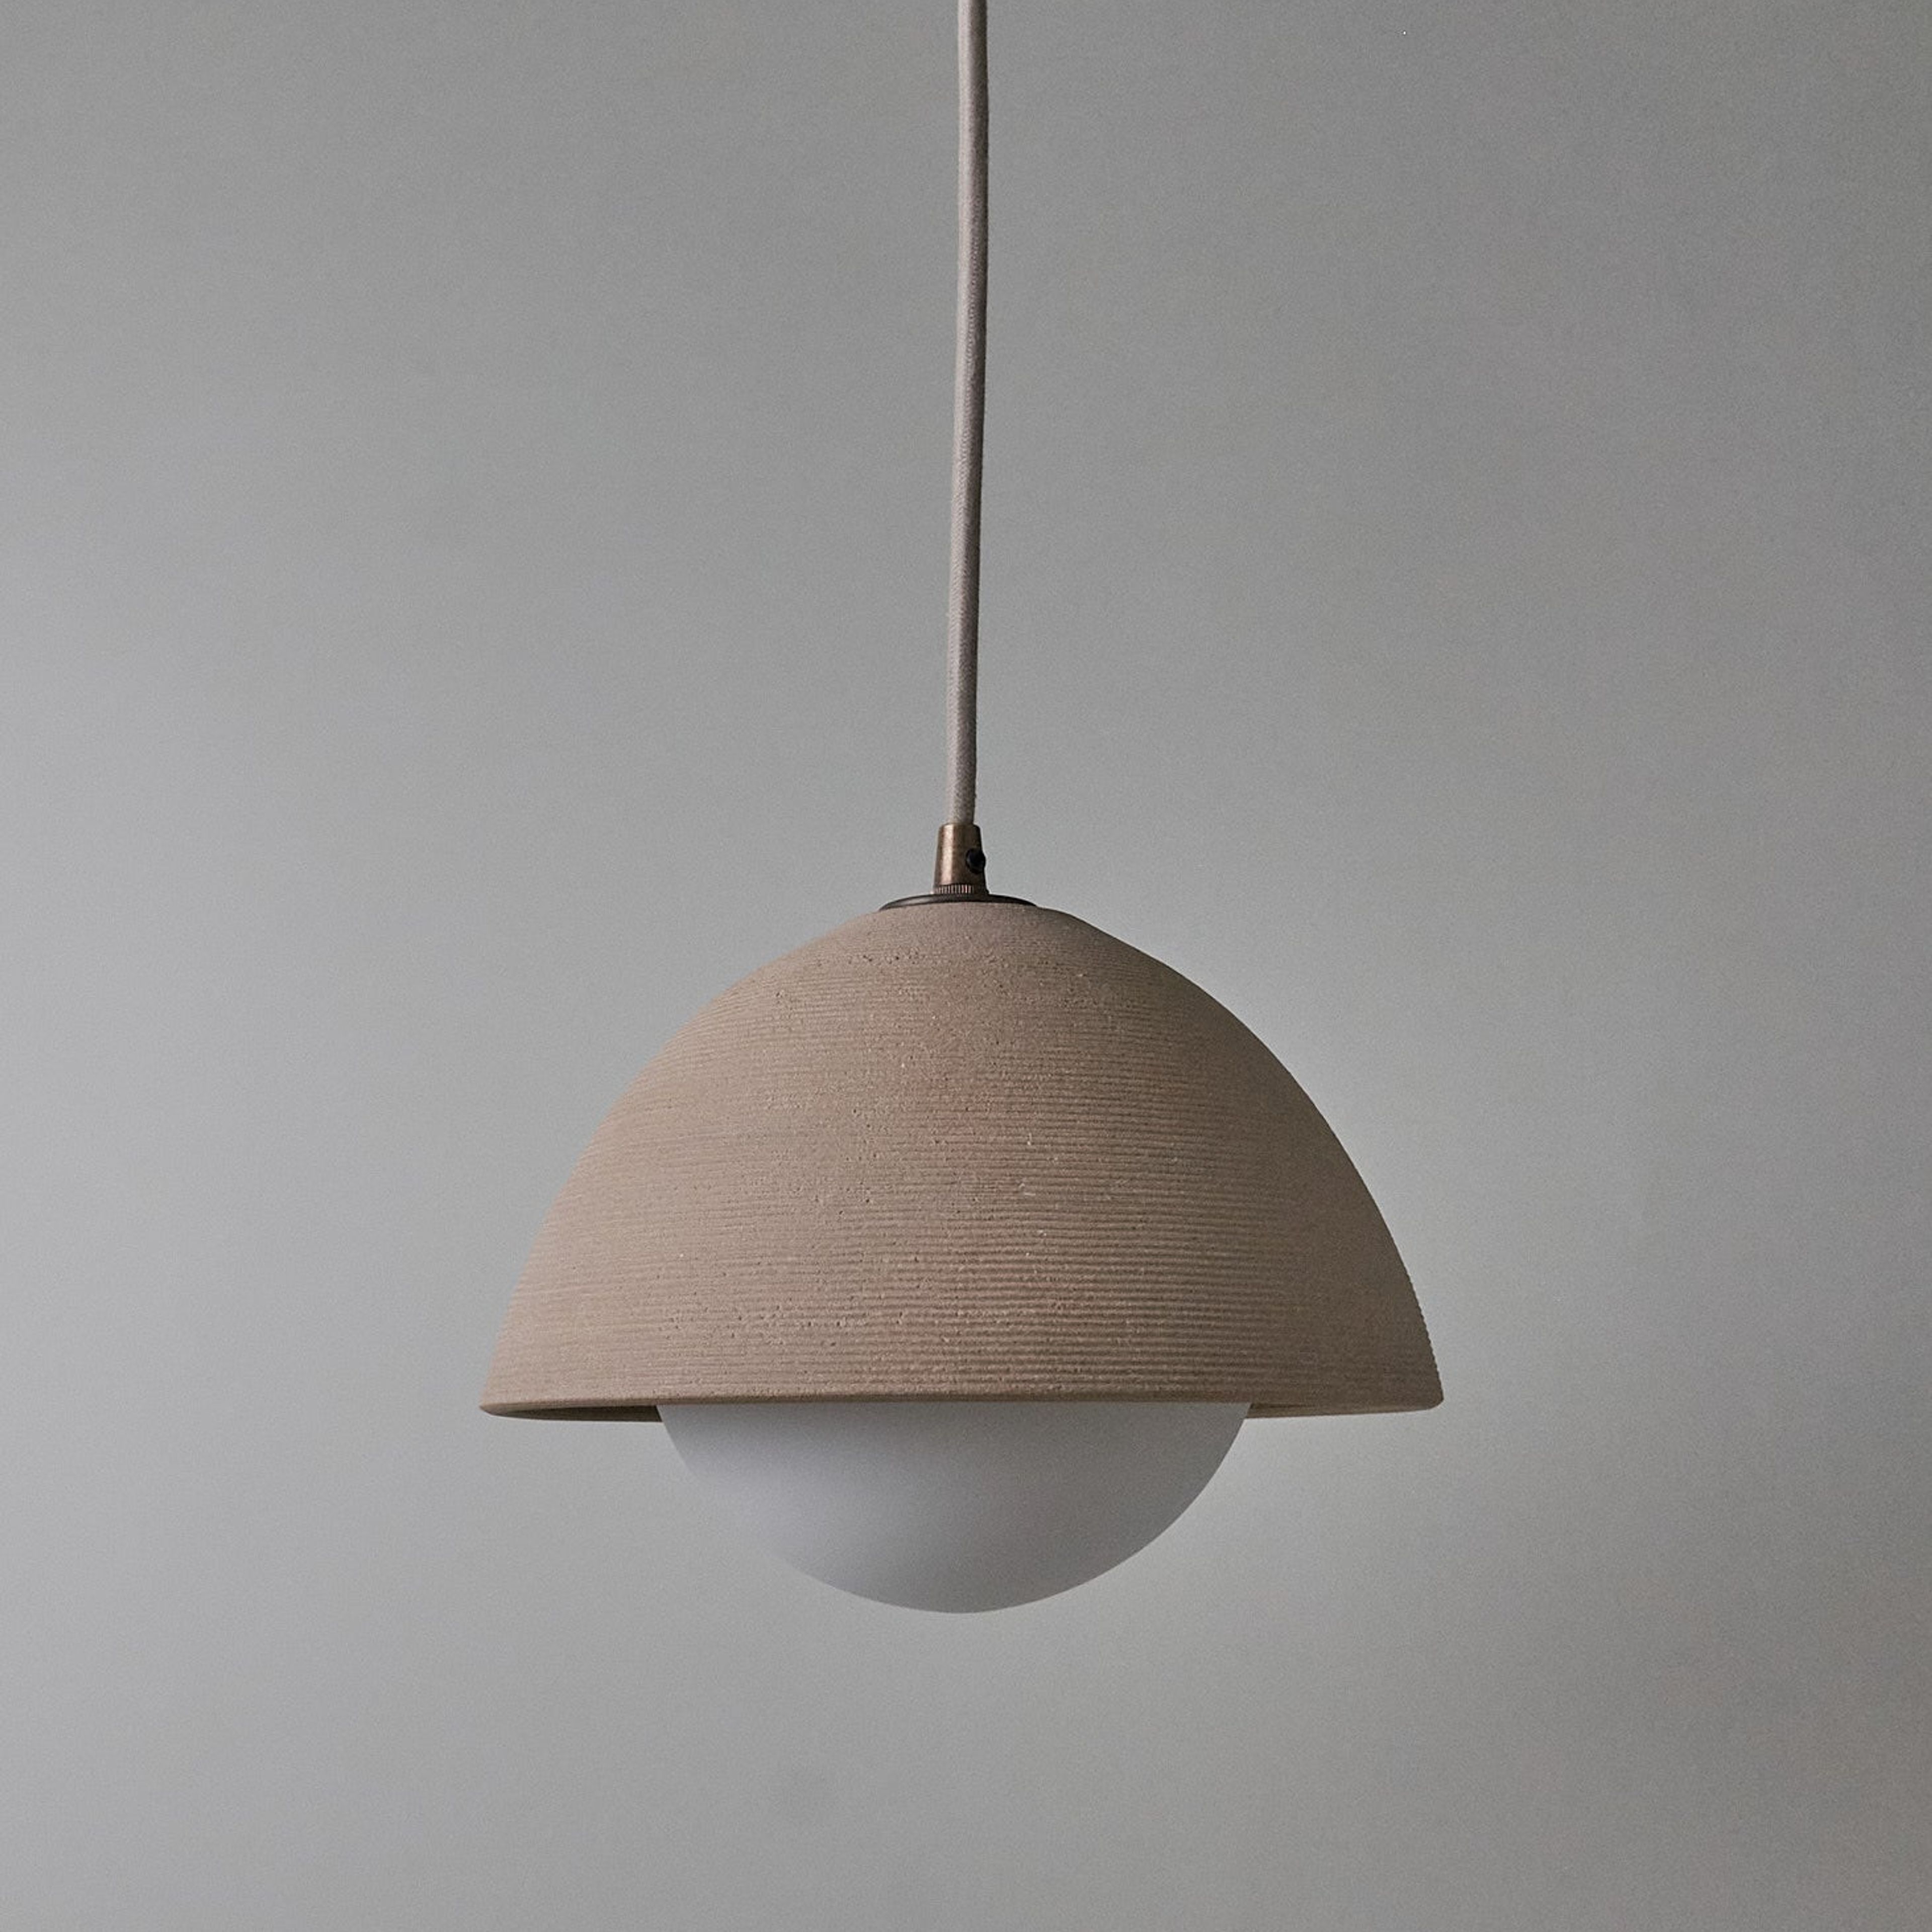 Small Dome Pendant Lamp in Combed Sand